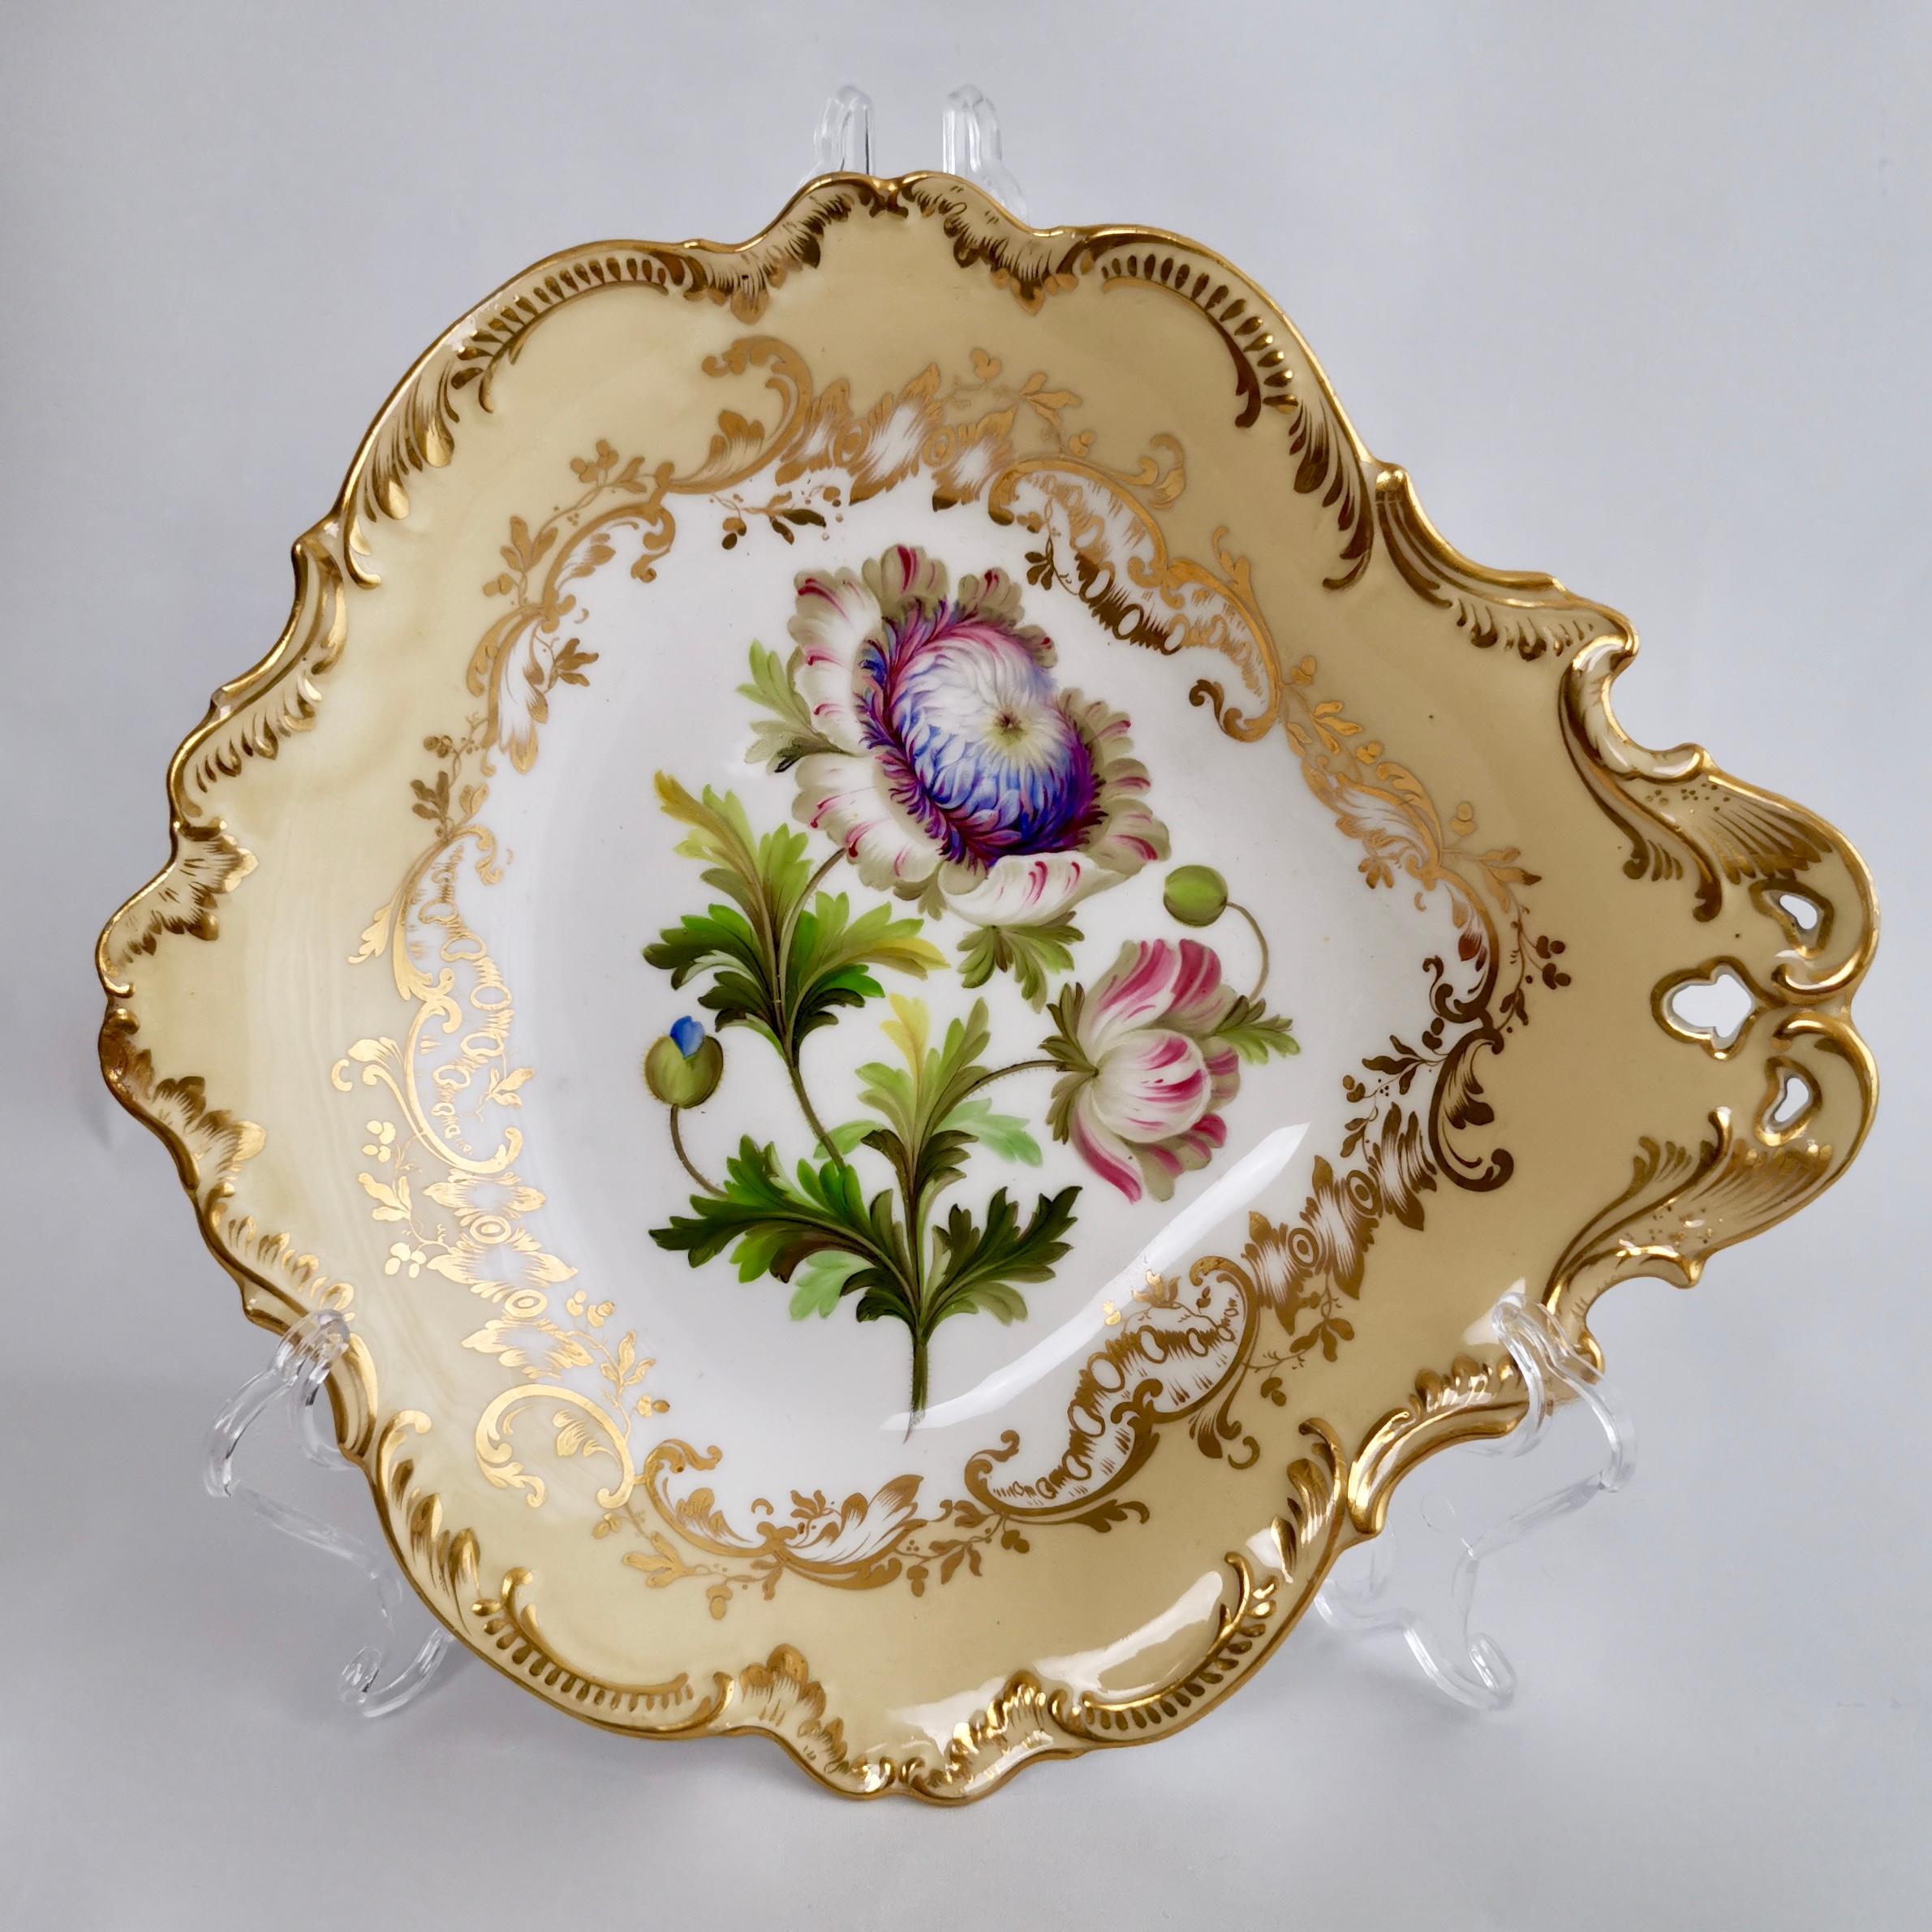 Rococo Revival Coalport Part Dessert Service, Named Flowers by John Toulouse, 1843